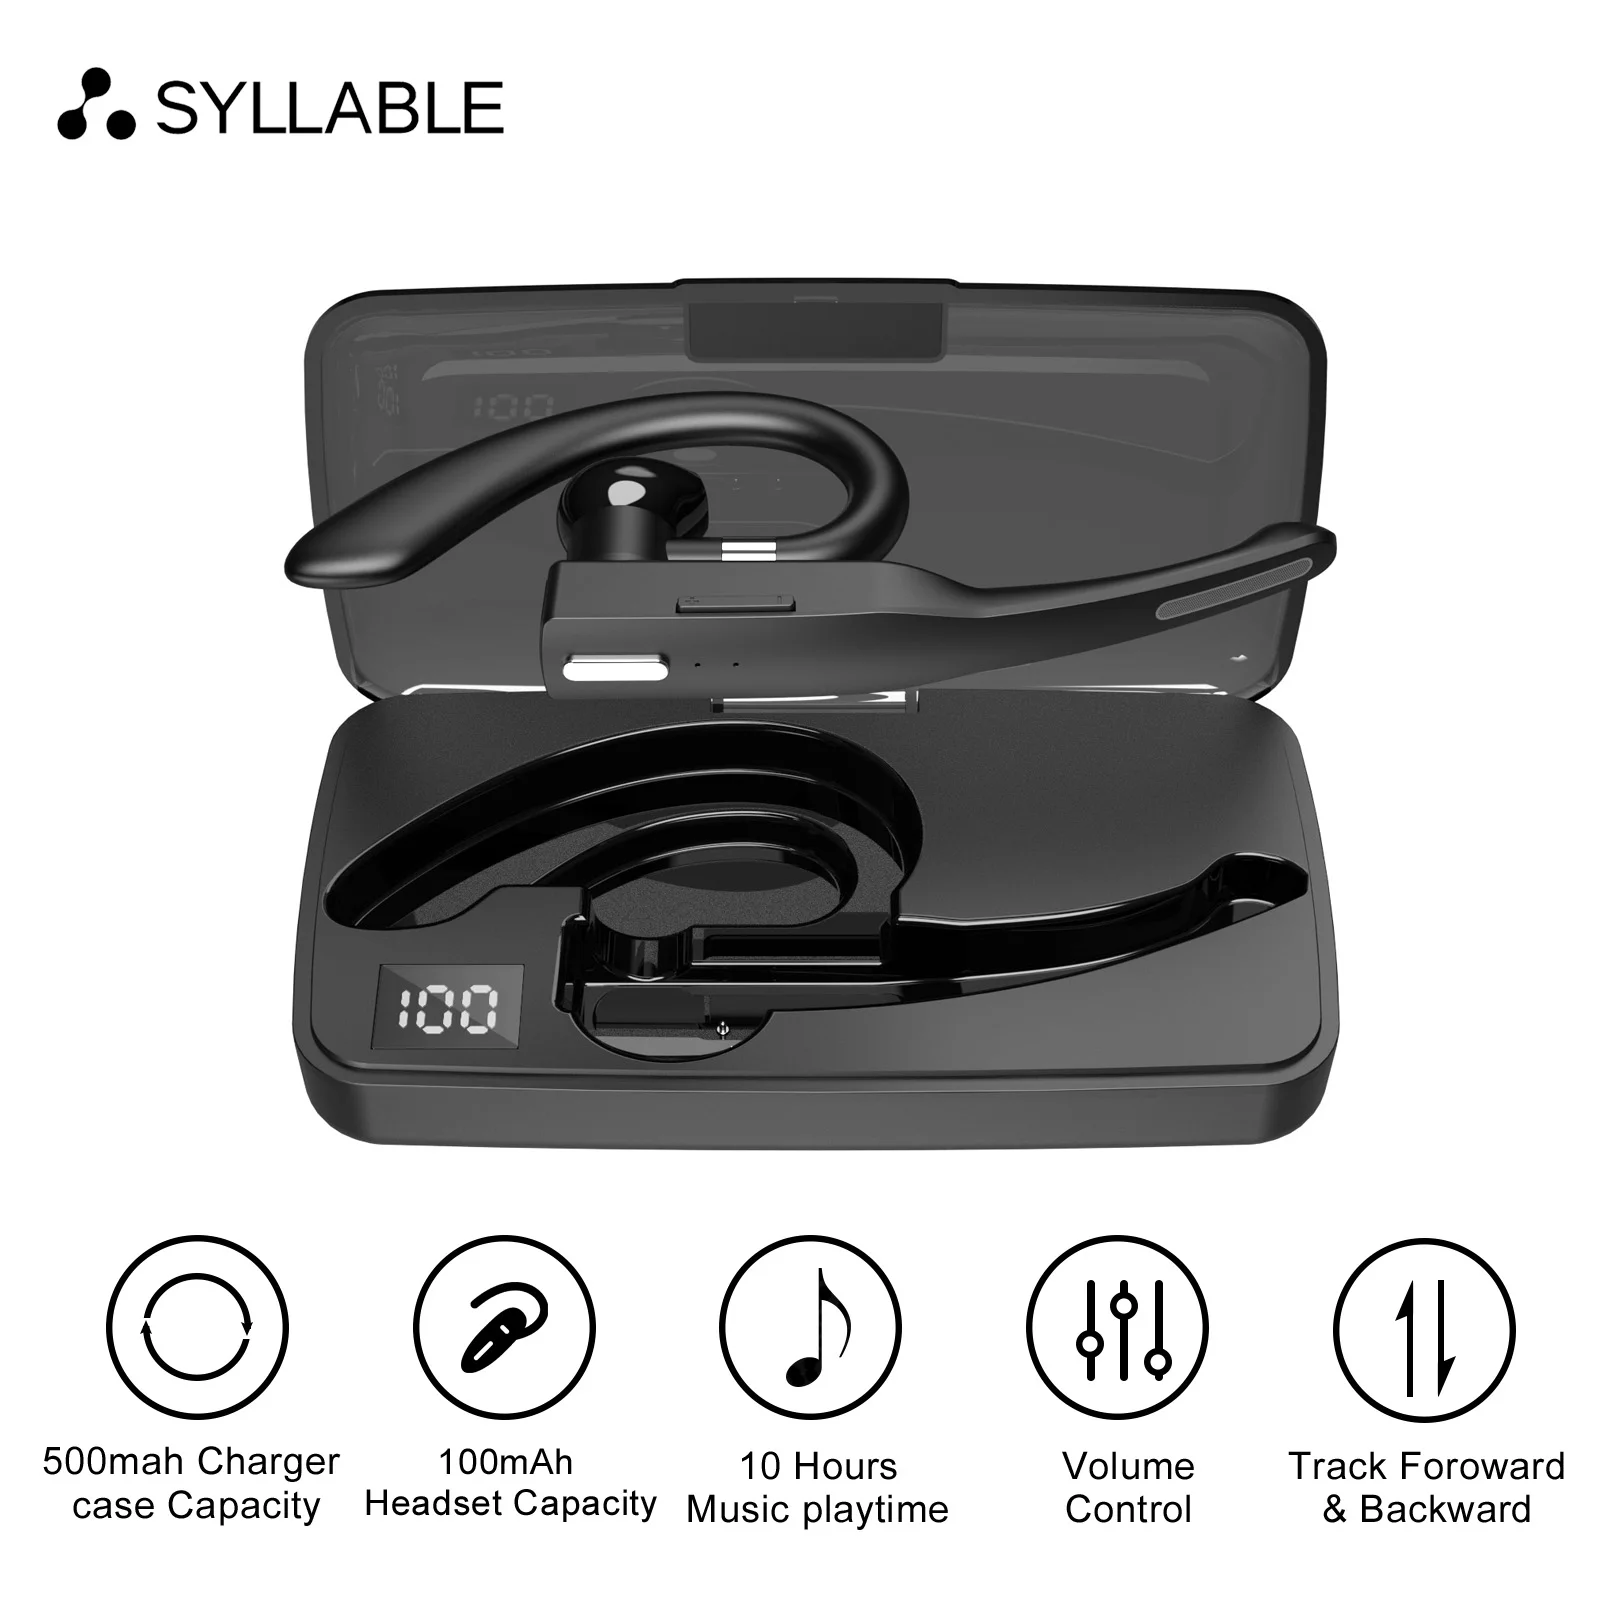 

Original SYLLABLE YYK-525 wireless sport Earphones Fit for BT V5.1 bass noise reduction SYLLABLE YYK-525 Volume control earbuds